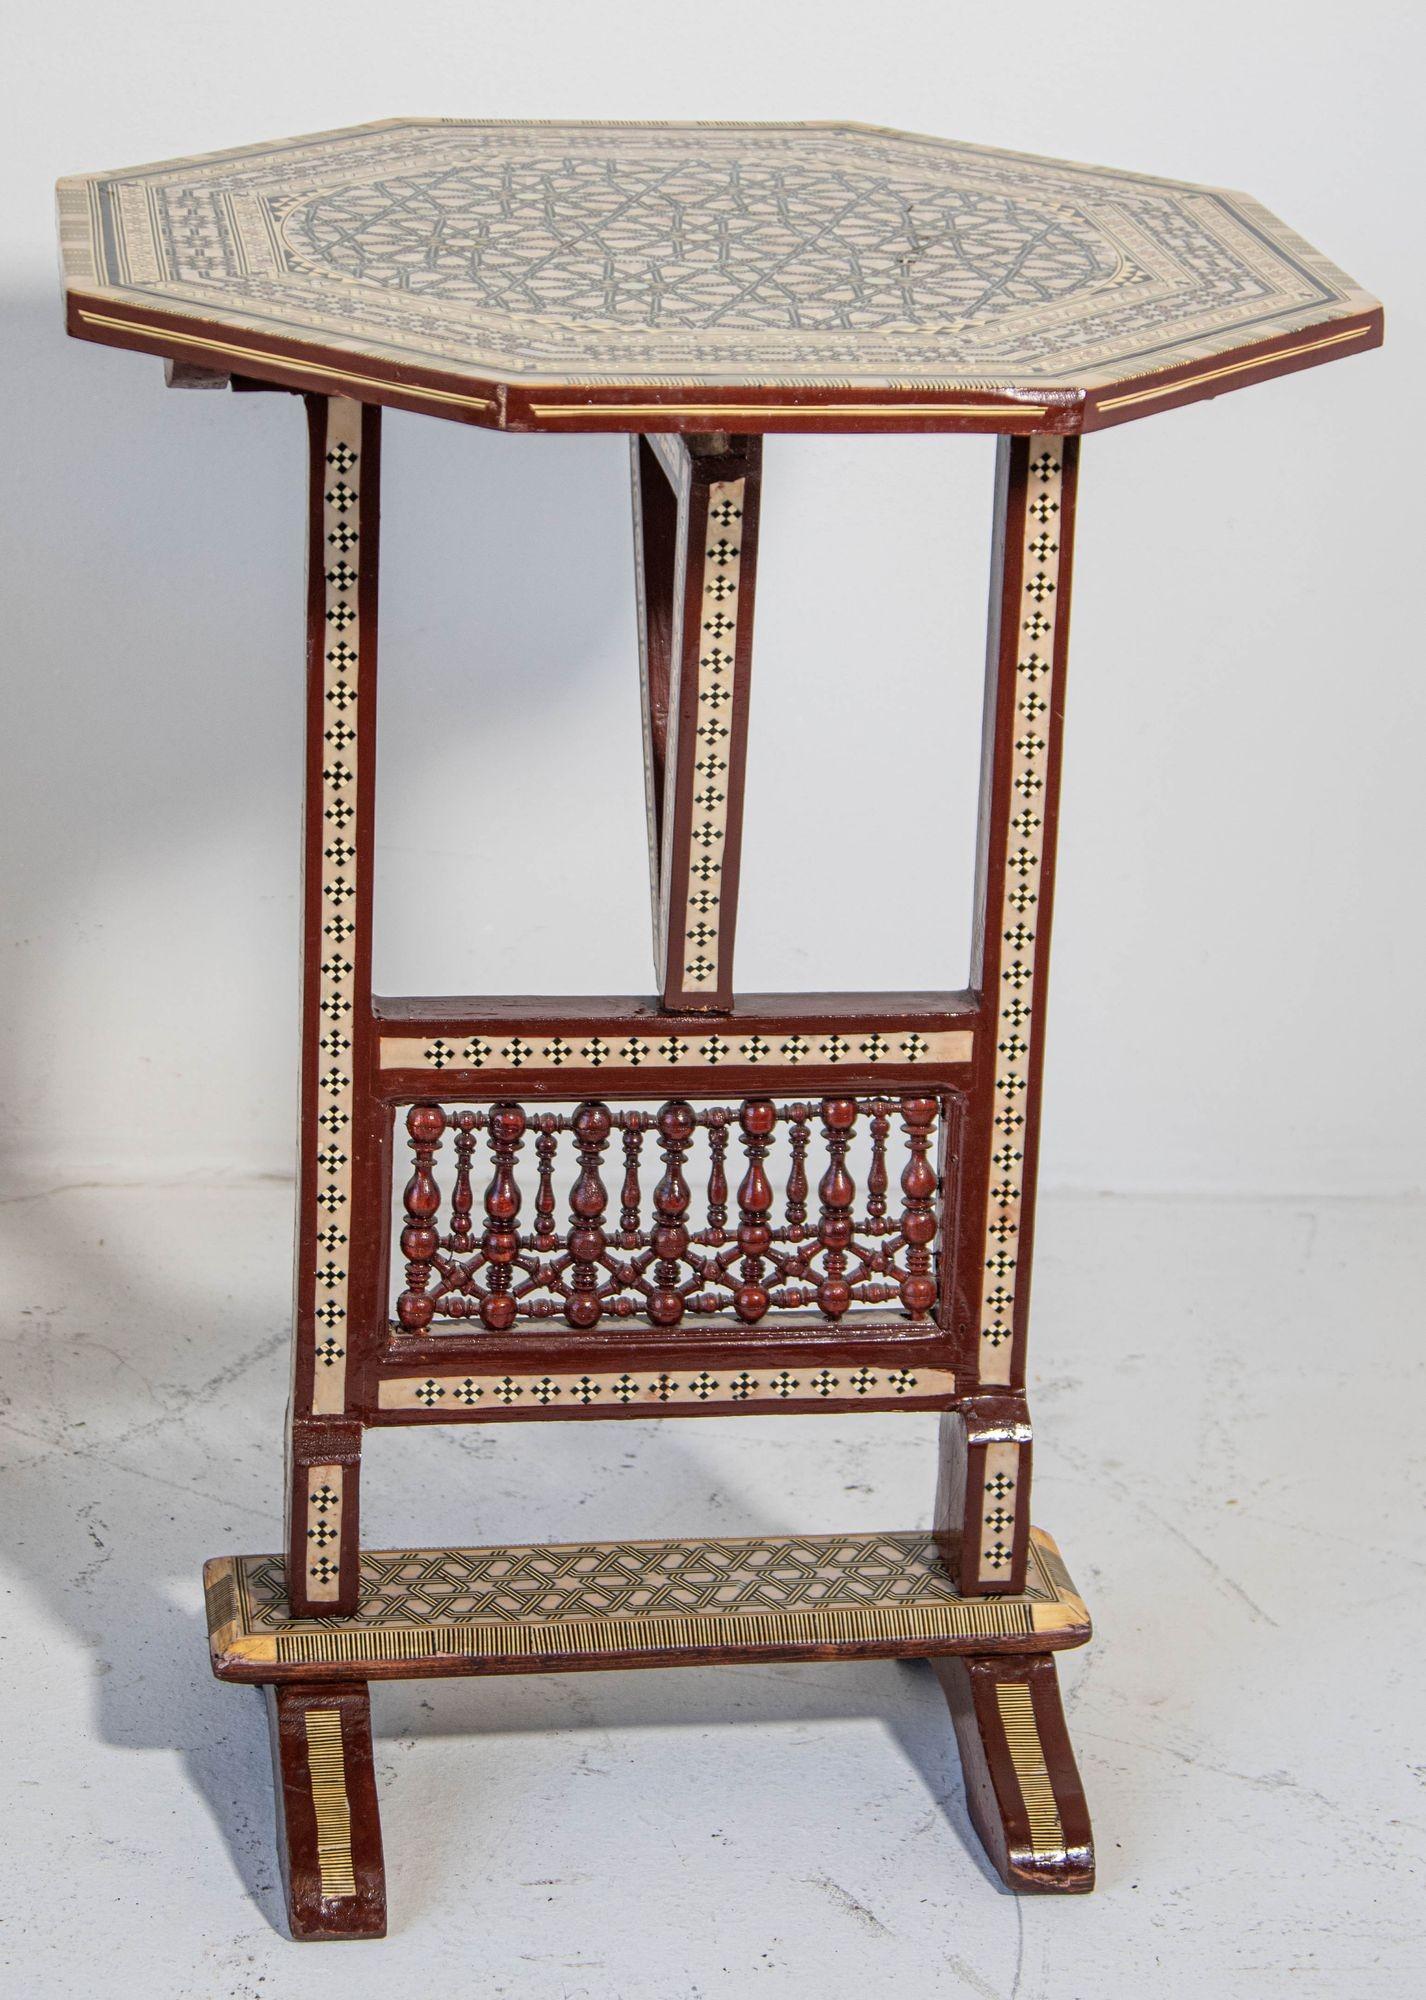 Vintage 1950s Egyptian Octagonal Side Table Egyptian Moorish Tilt-Top Inlaid Table.
Middle Eastern Egyptian octagonal side table with marquetry inlaid and mother-of-pearl.
Tilt-top drinks table with Moorish intricate geometric designs.
Octagonal